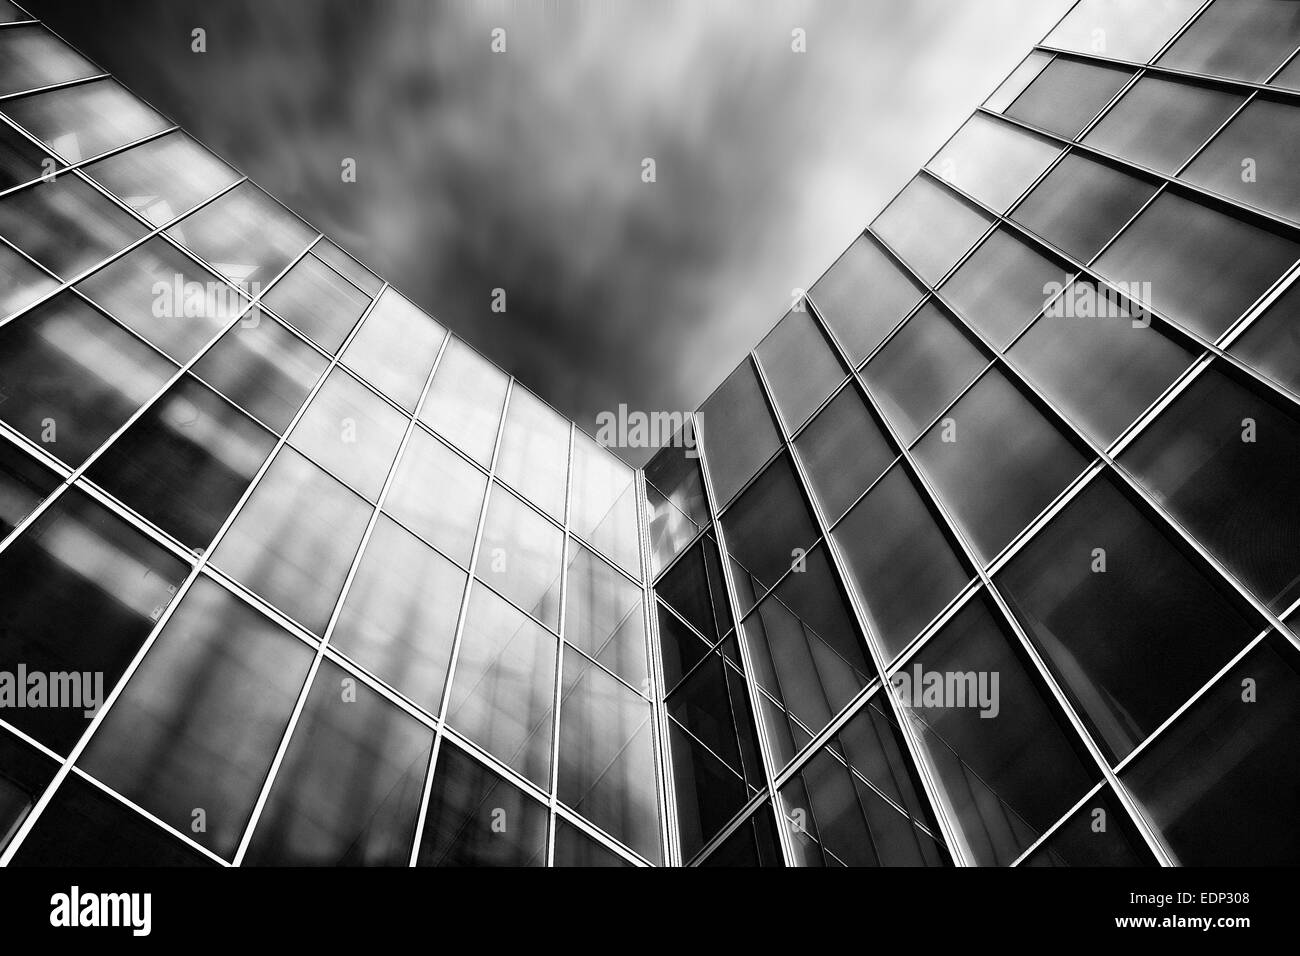 Abstract architecture black and white Stock Photo